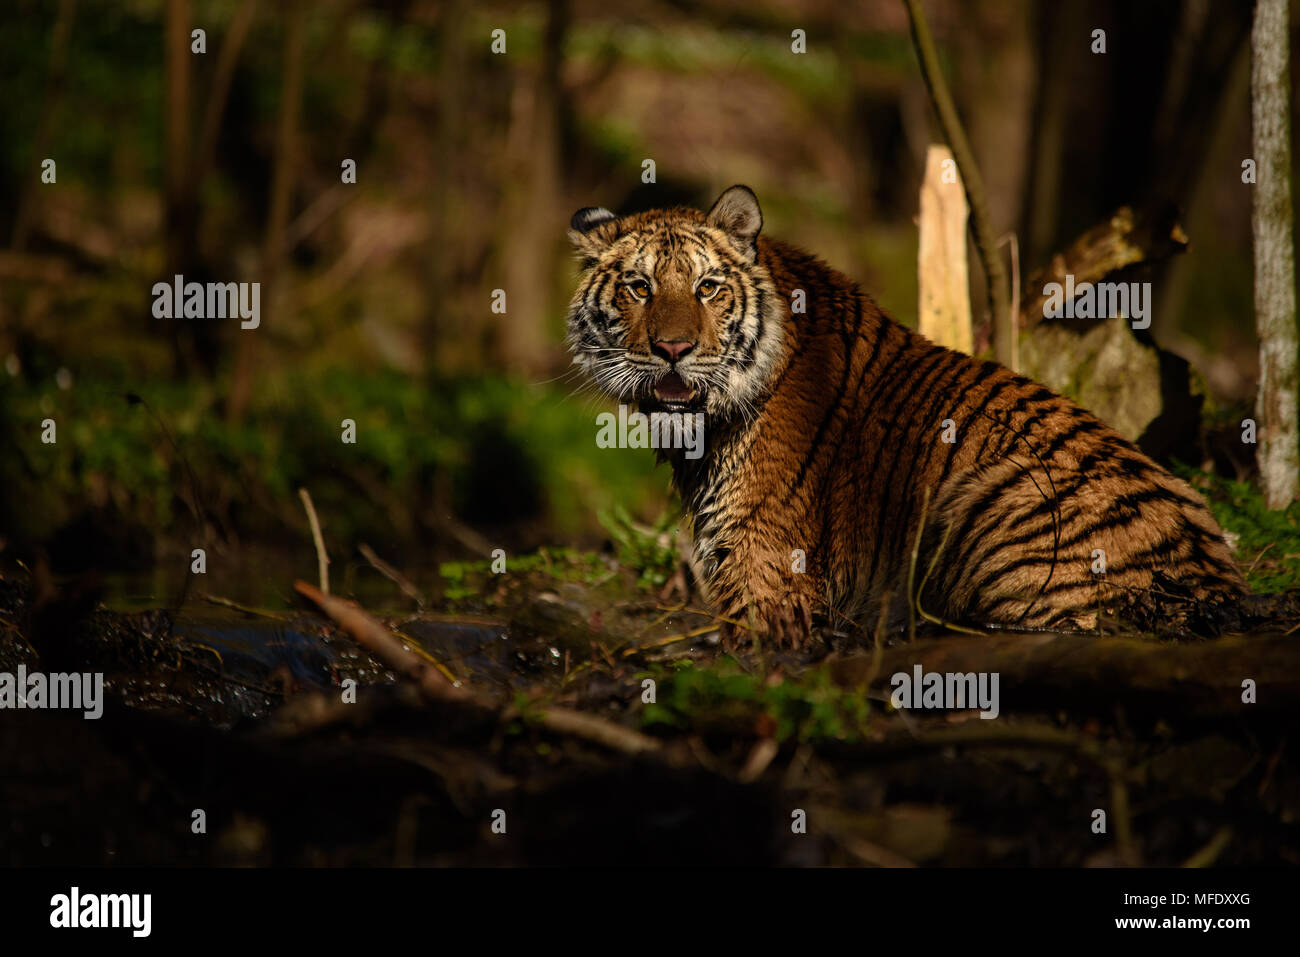 Siberian tiger female sitting in water / Tiger in water / Panthera tigris altaica Stock Photo